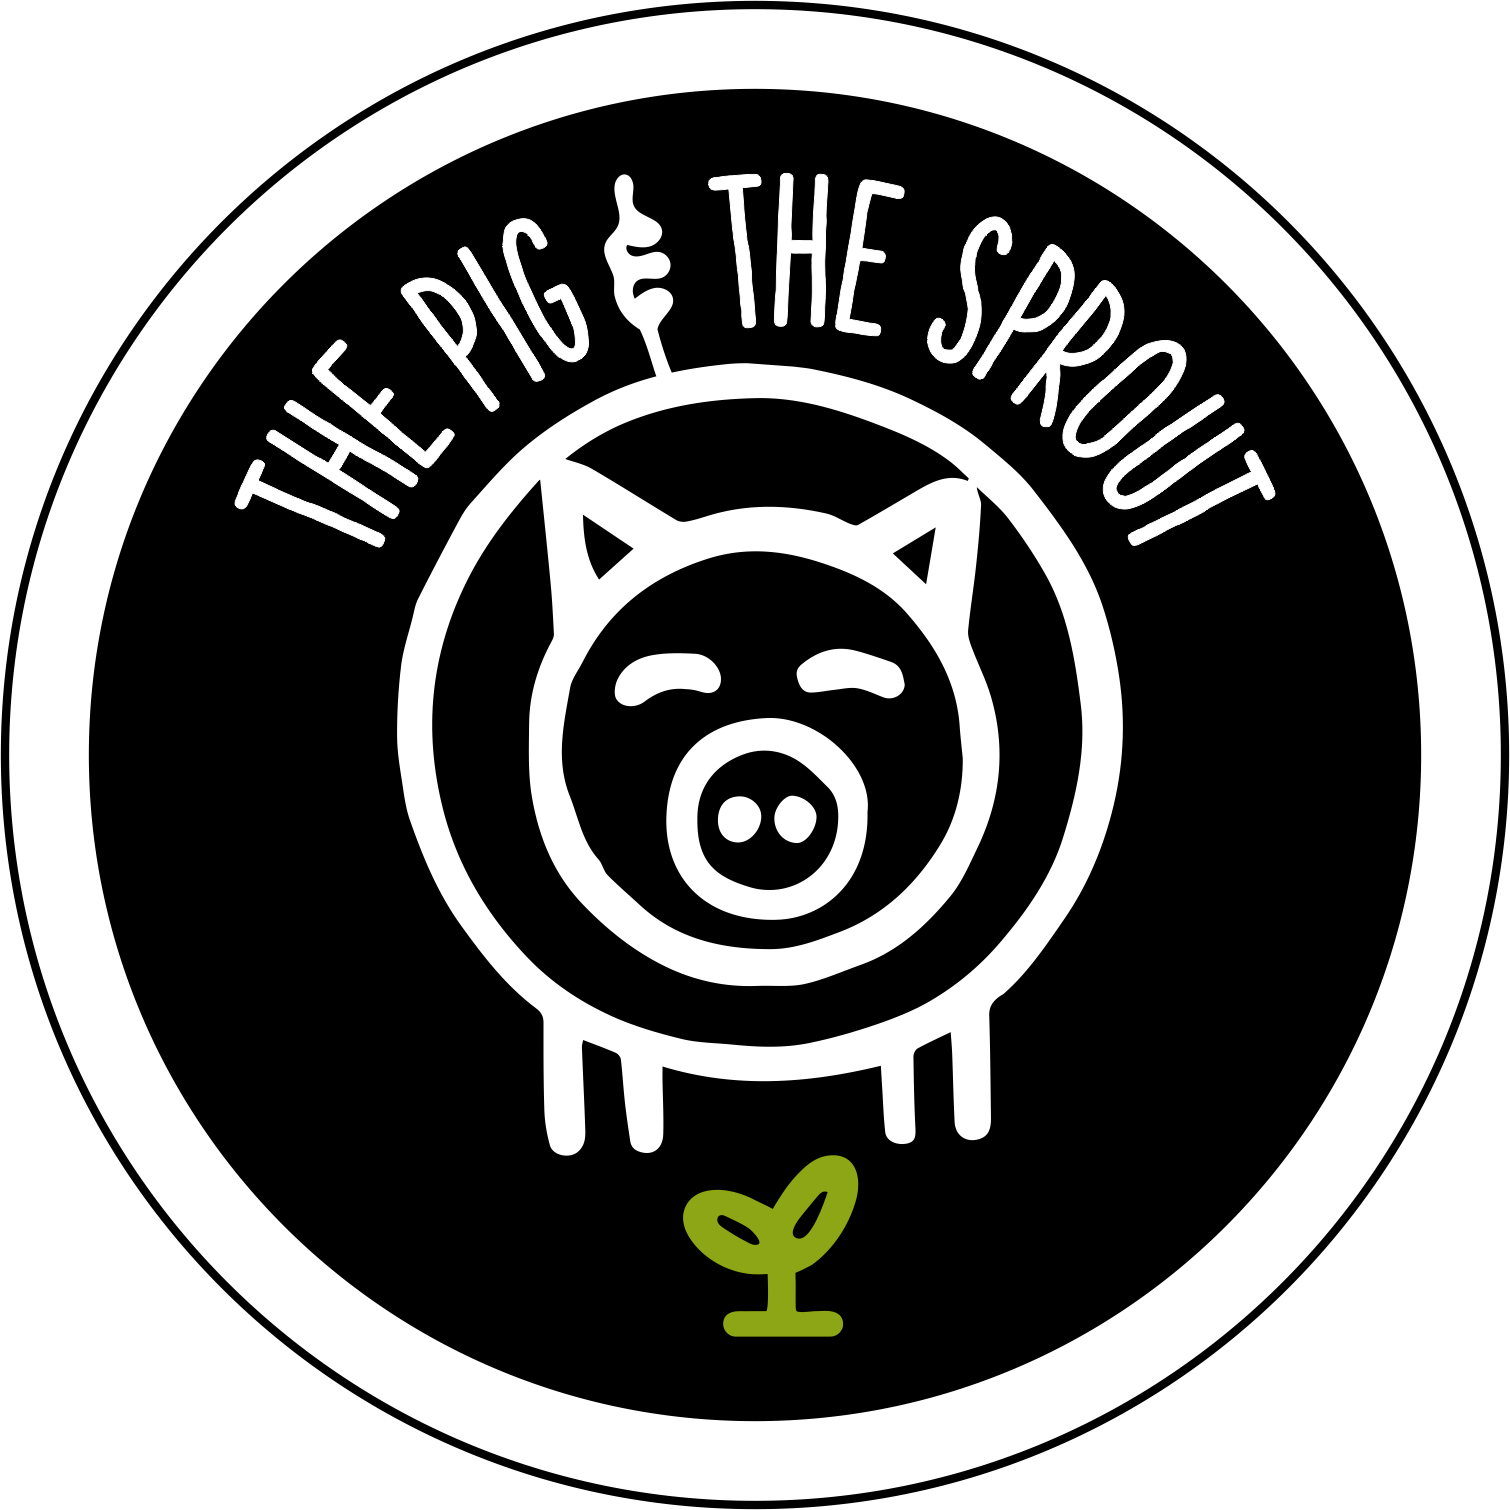 The Pig and The Sprout